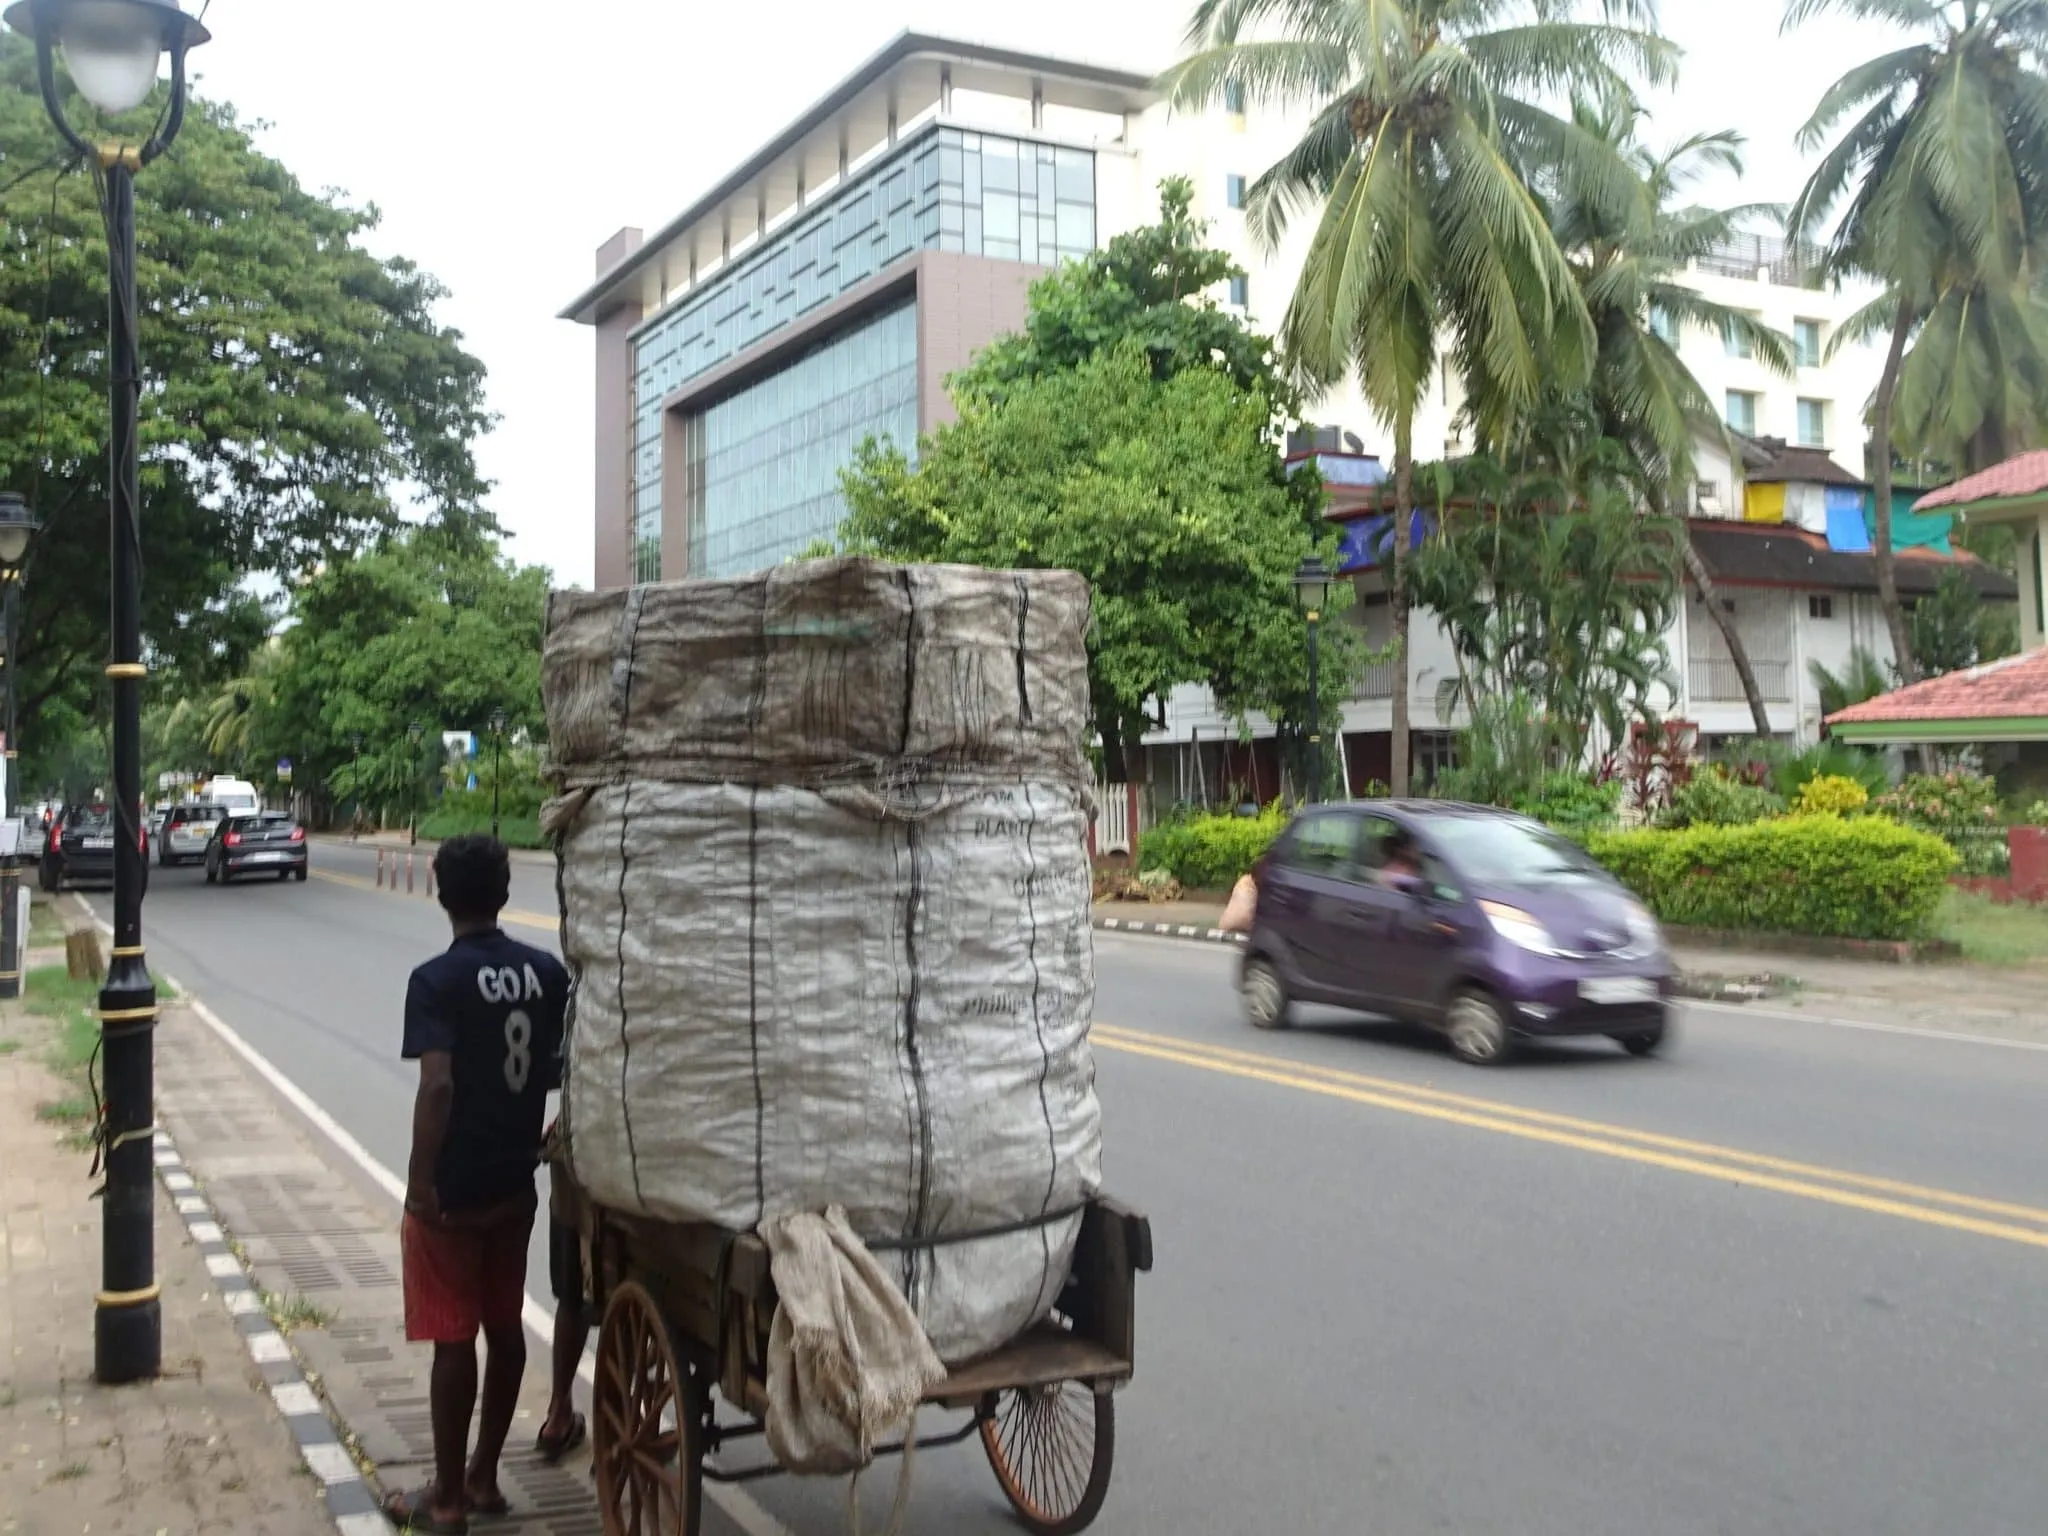 Dry Waste collector on a tri-cycle D B Road Miramar opp Fortune Hotel |